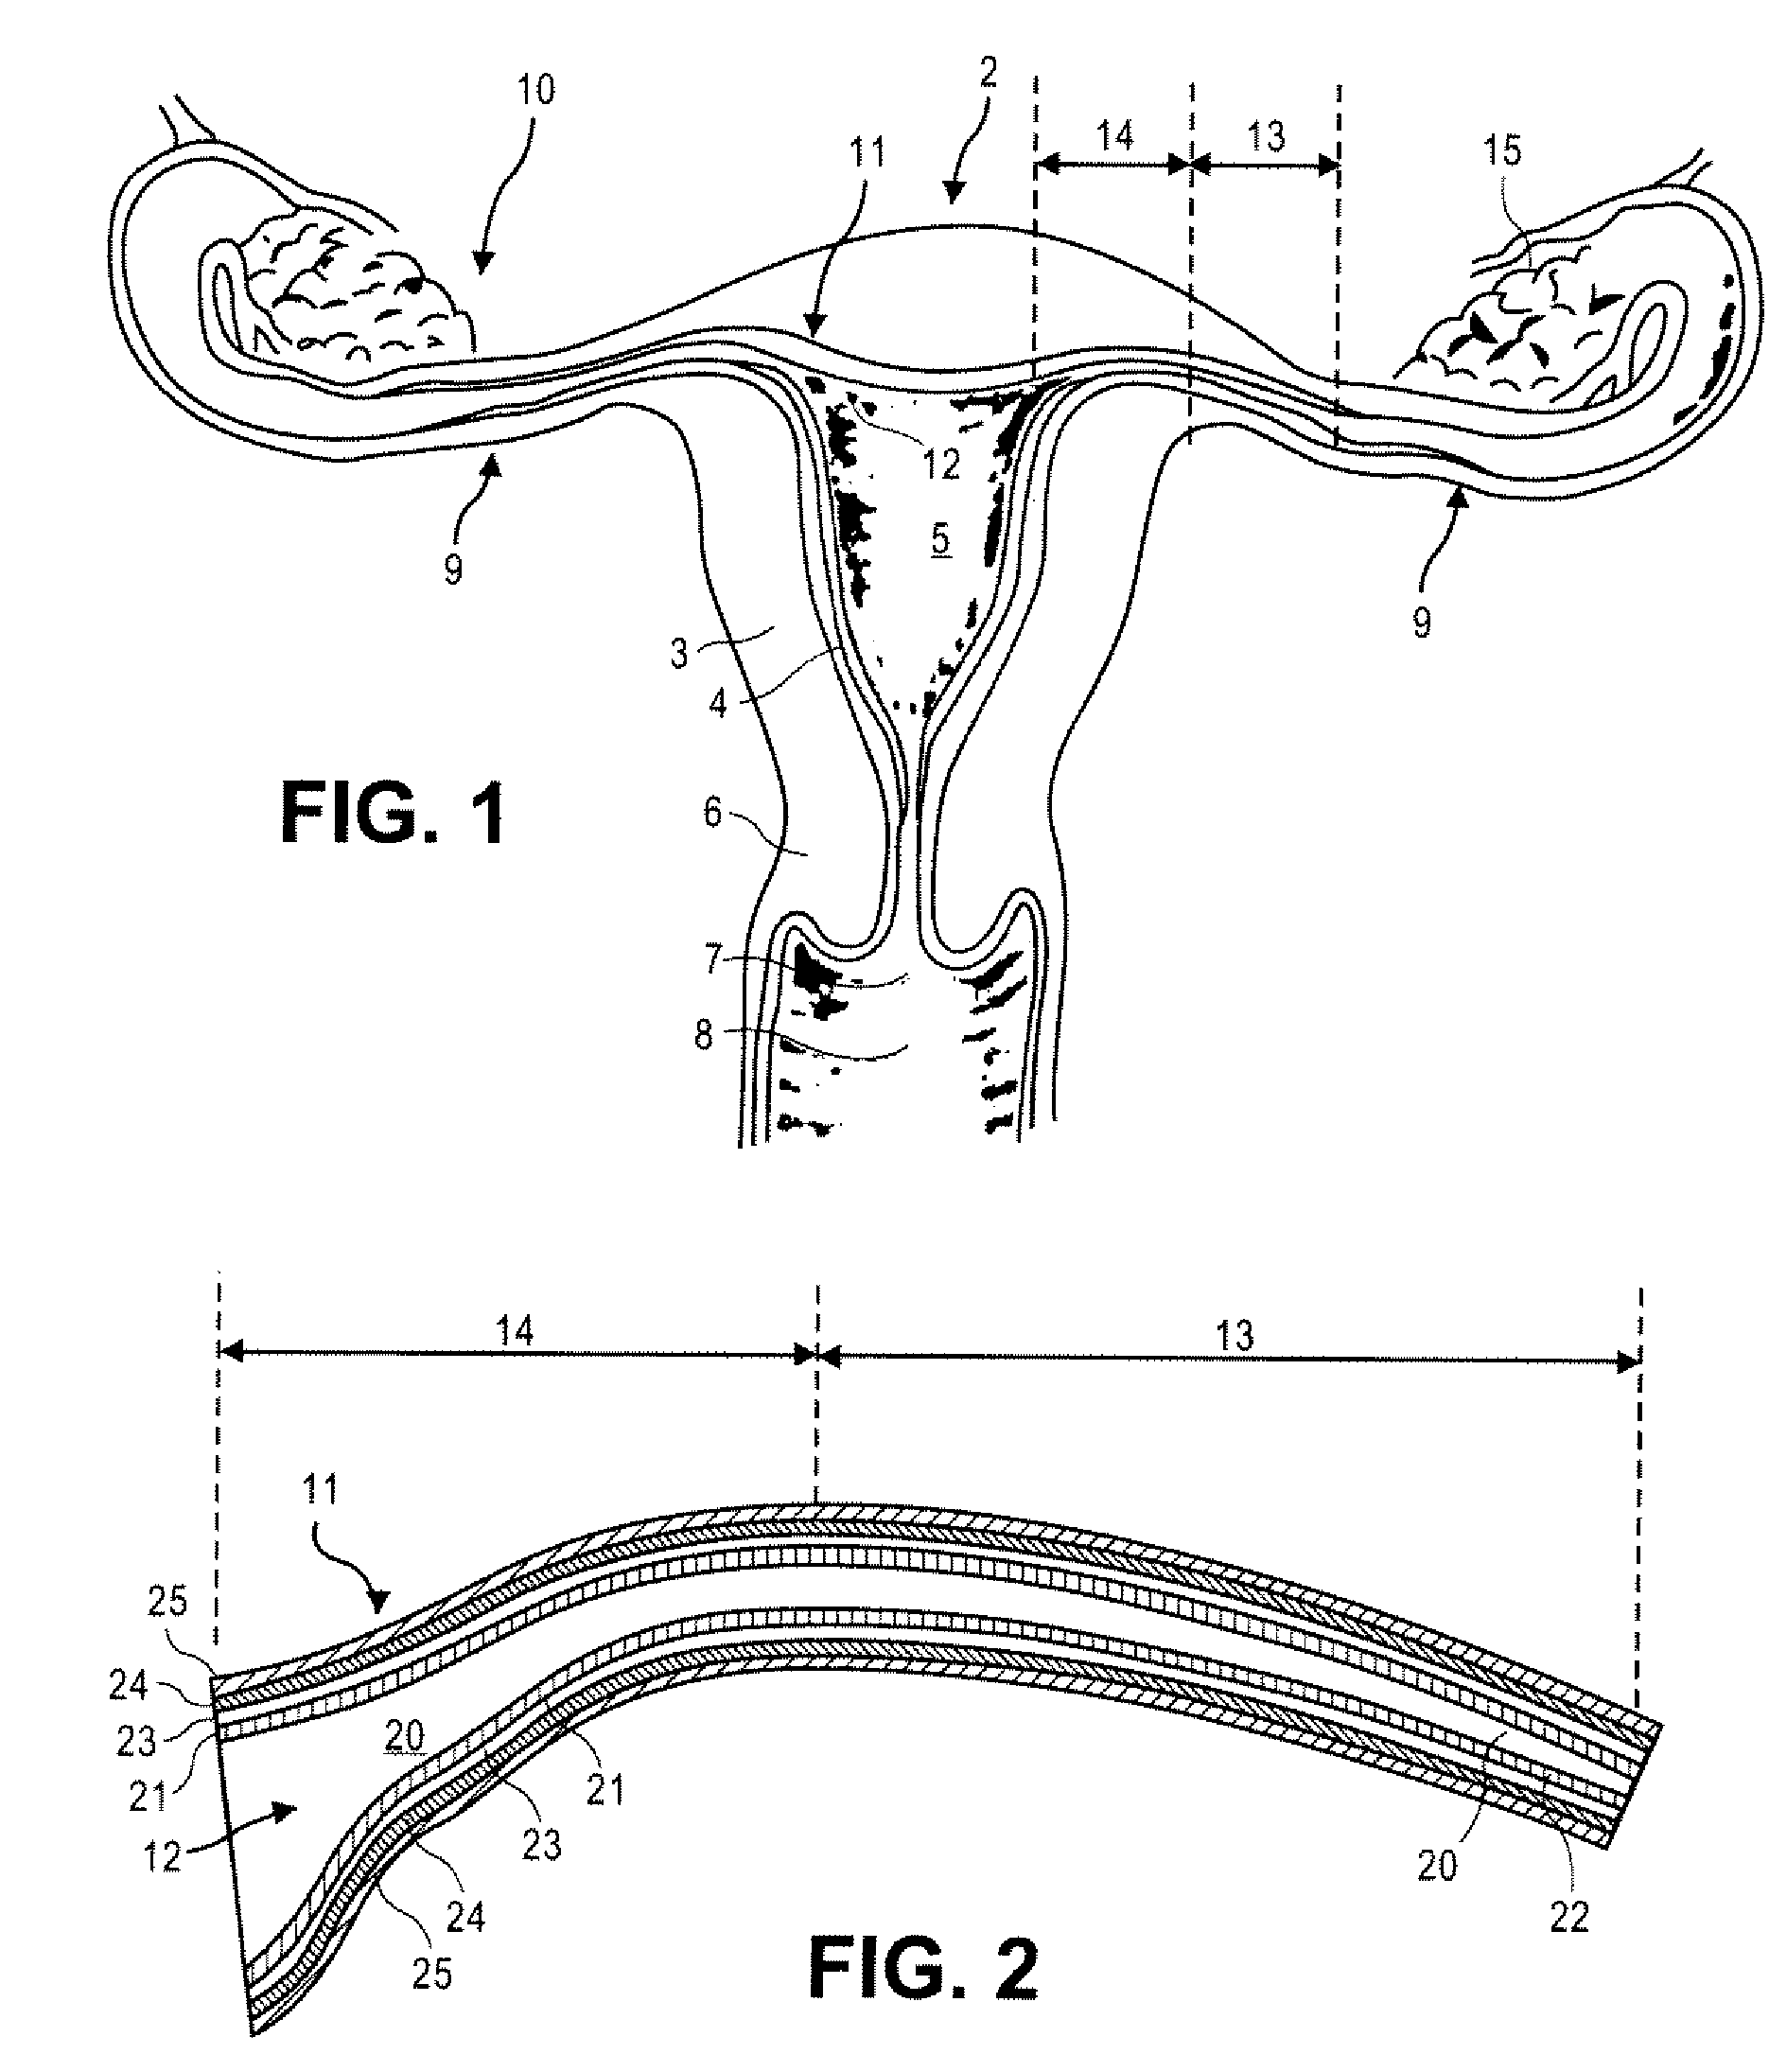 Methods and devices for occluding an ovarian pathway